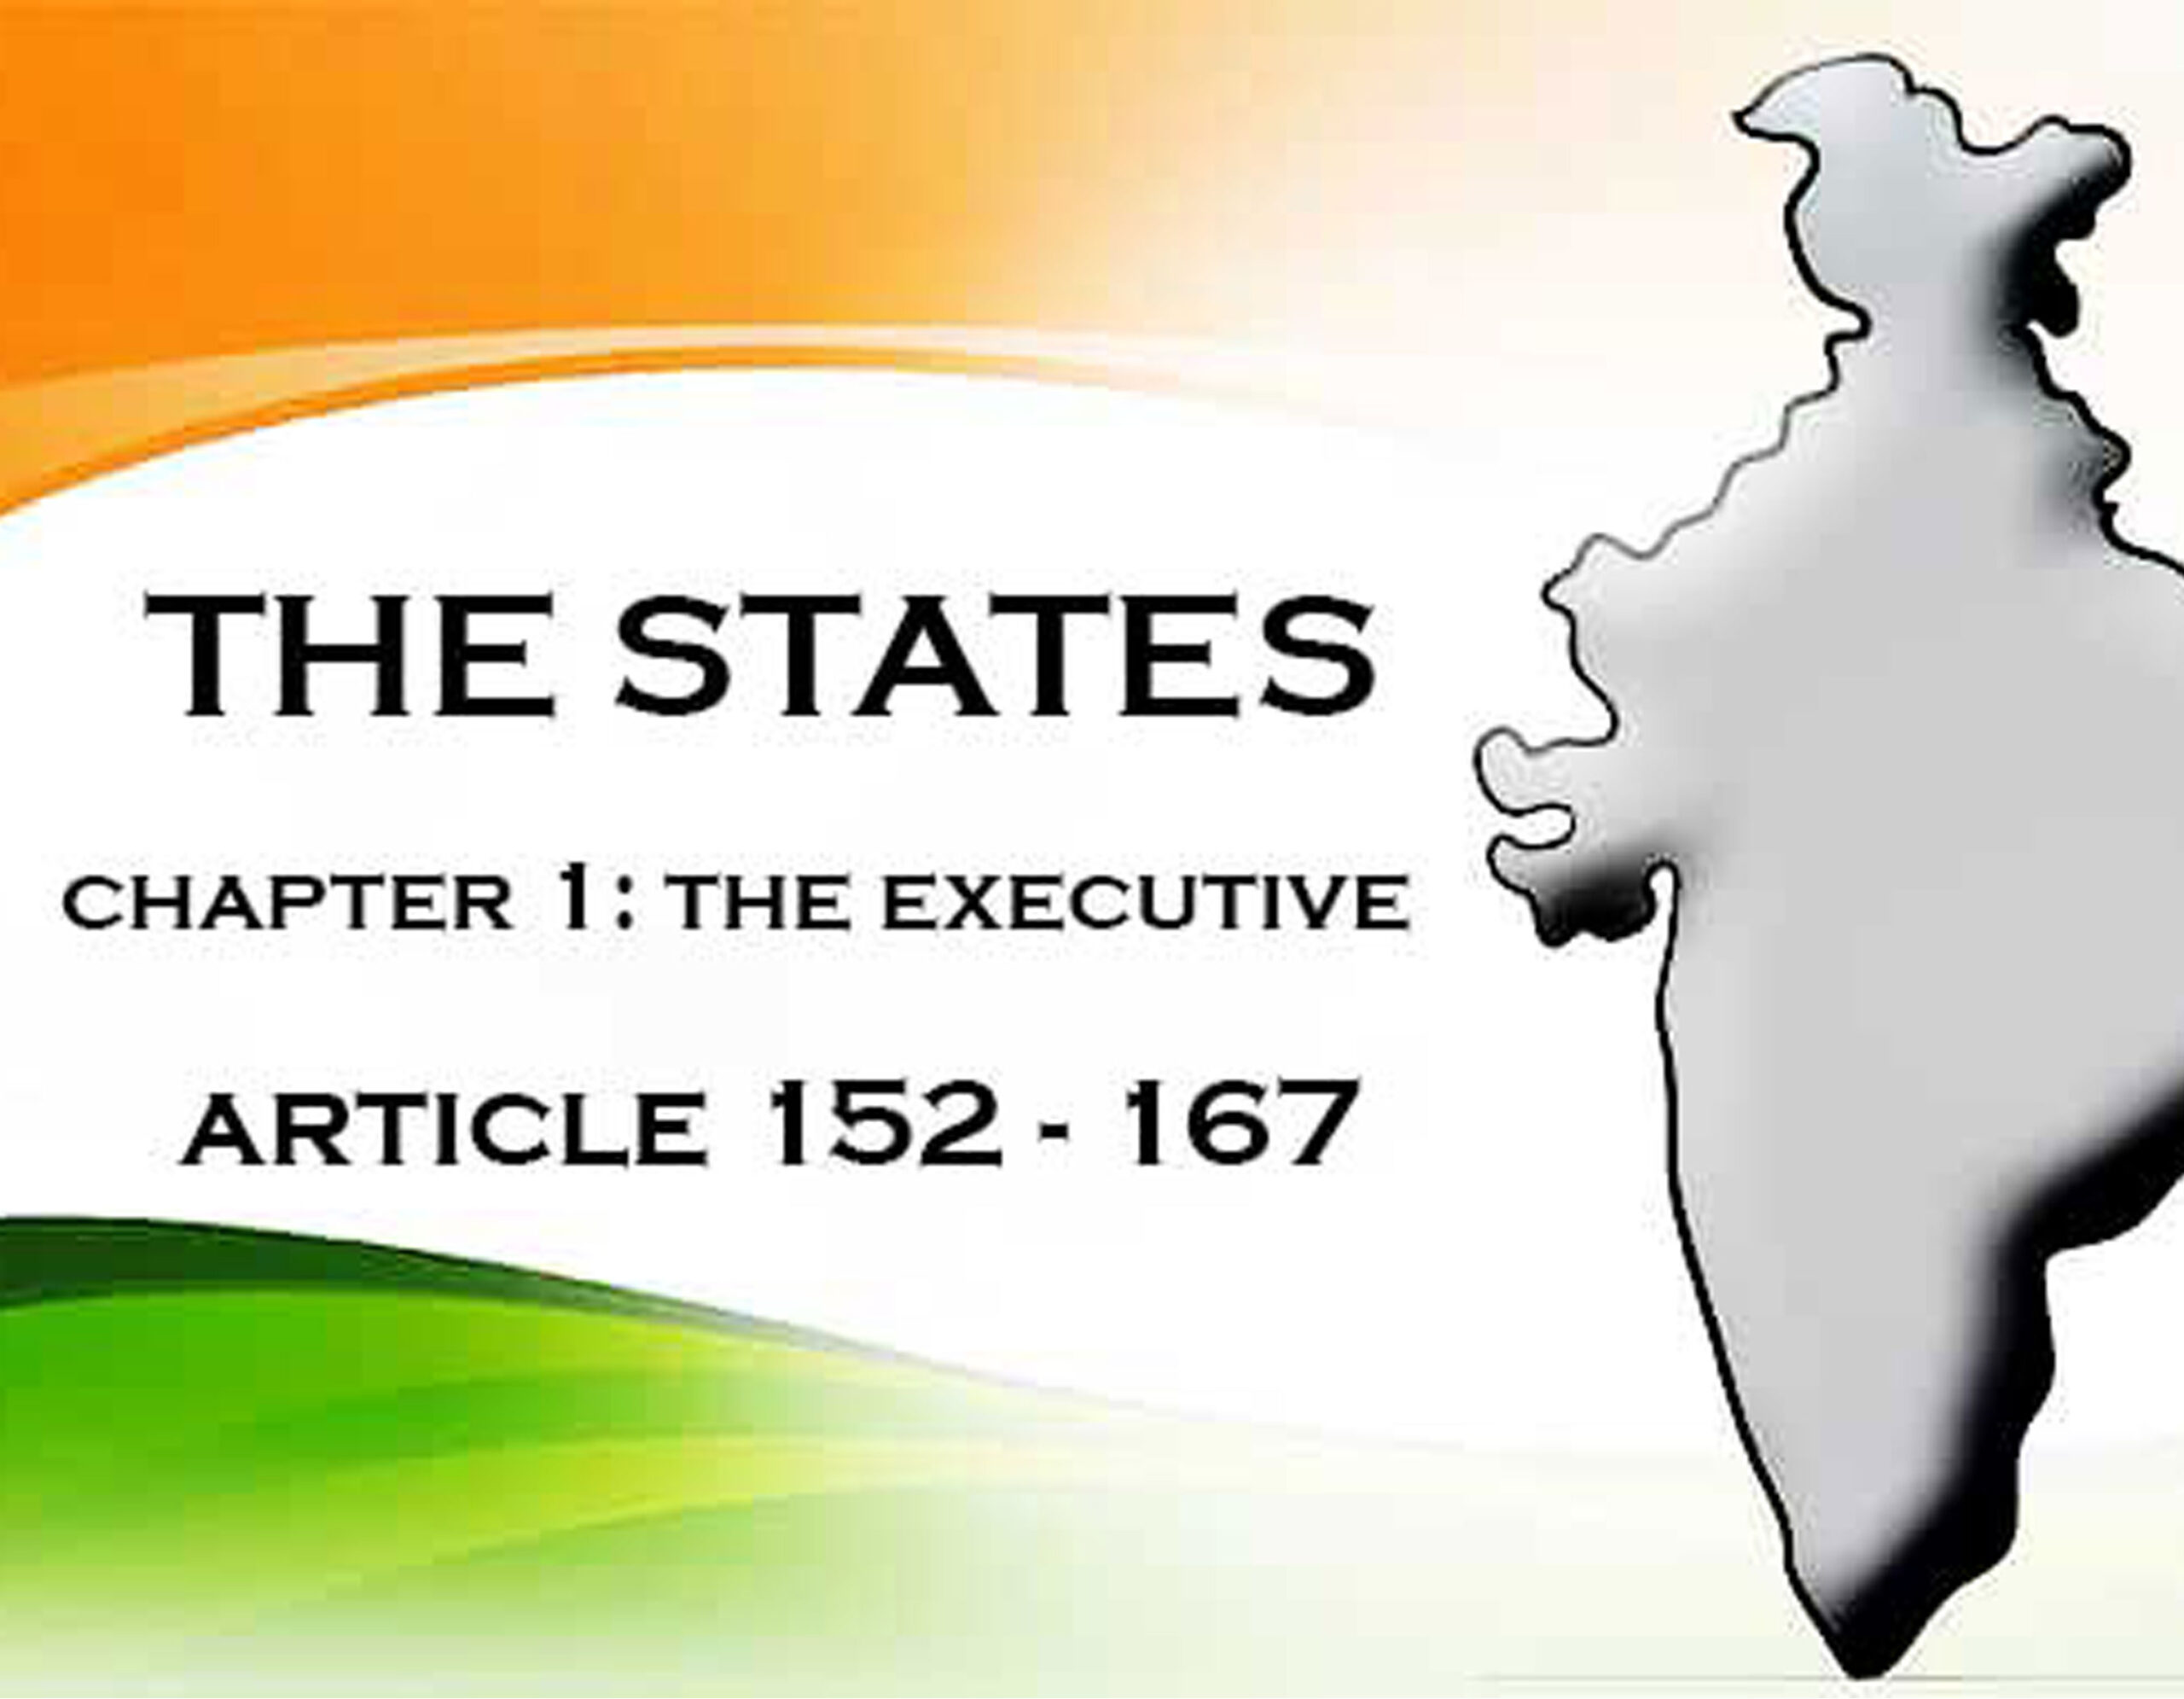 Chapter 1 : State Executive (Article 152-167)